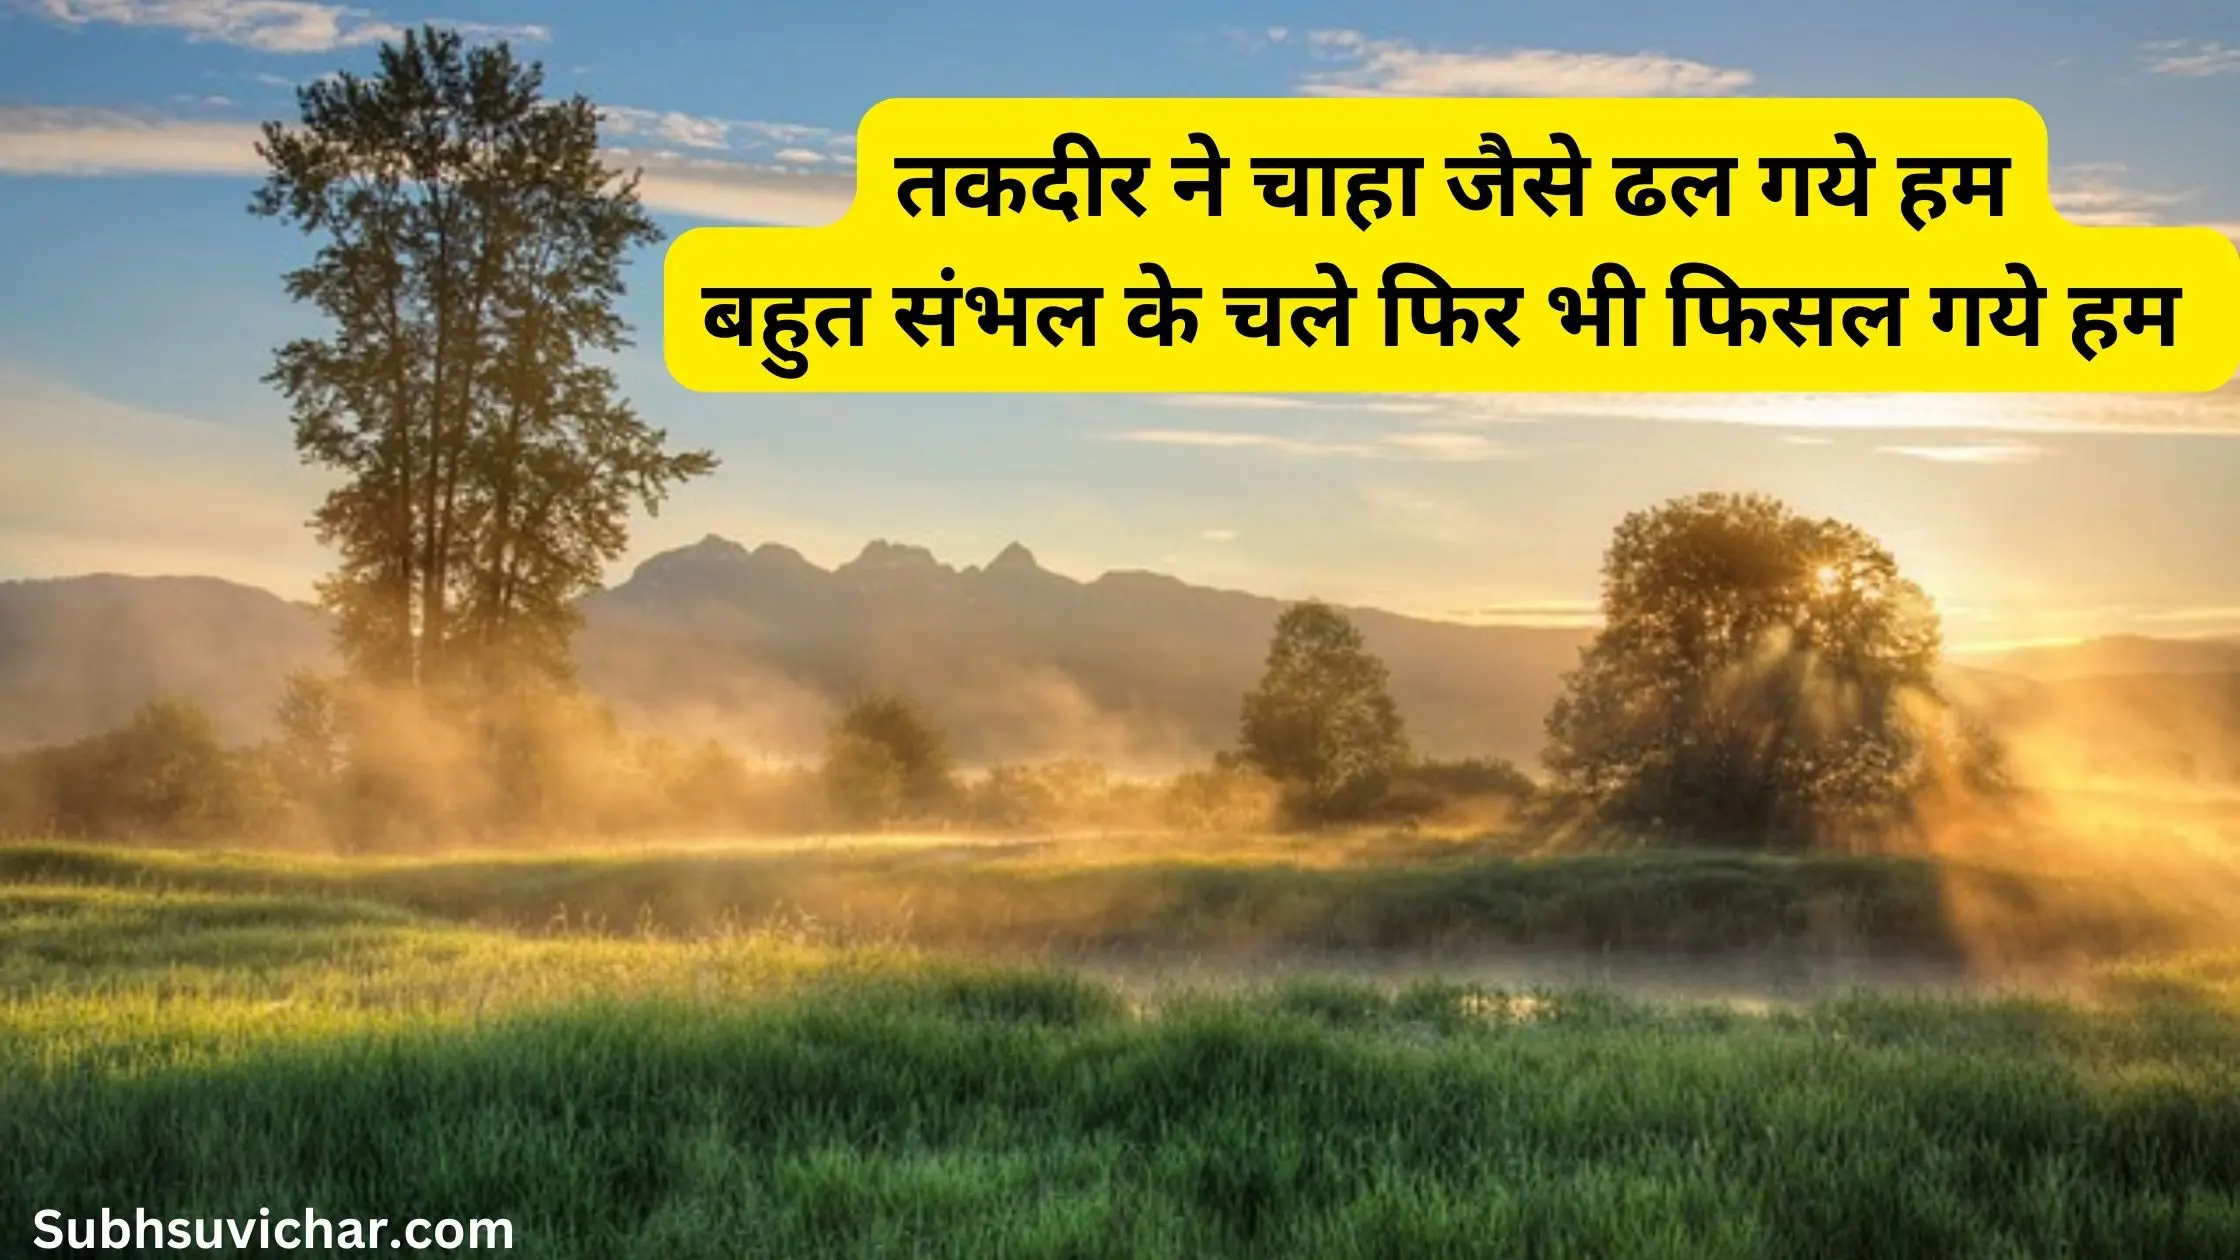 This post contains huge collection of suvichar in hindi font with high quality of images for your whatsapp and facebook status.